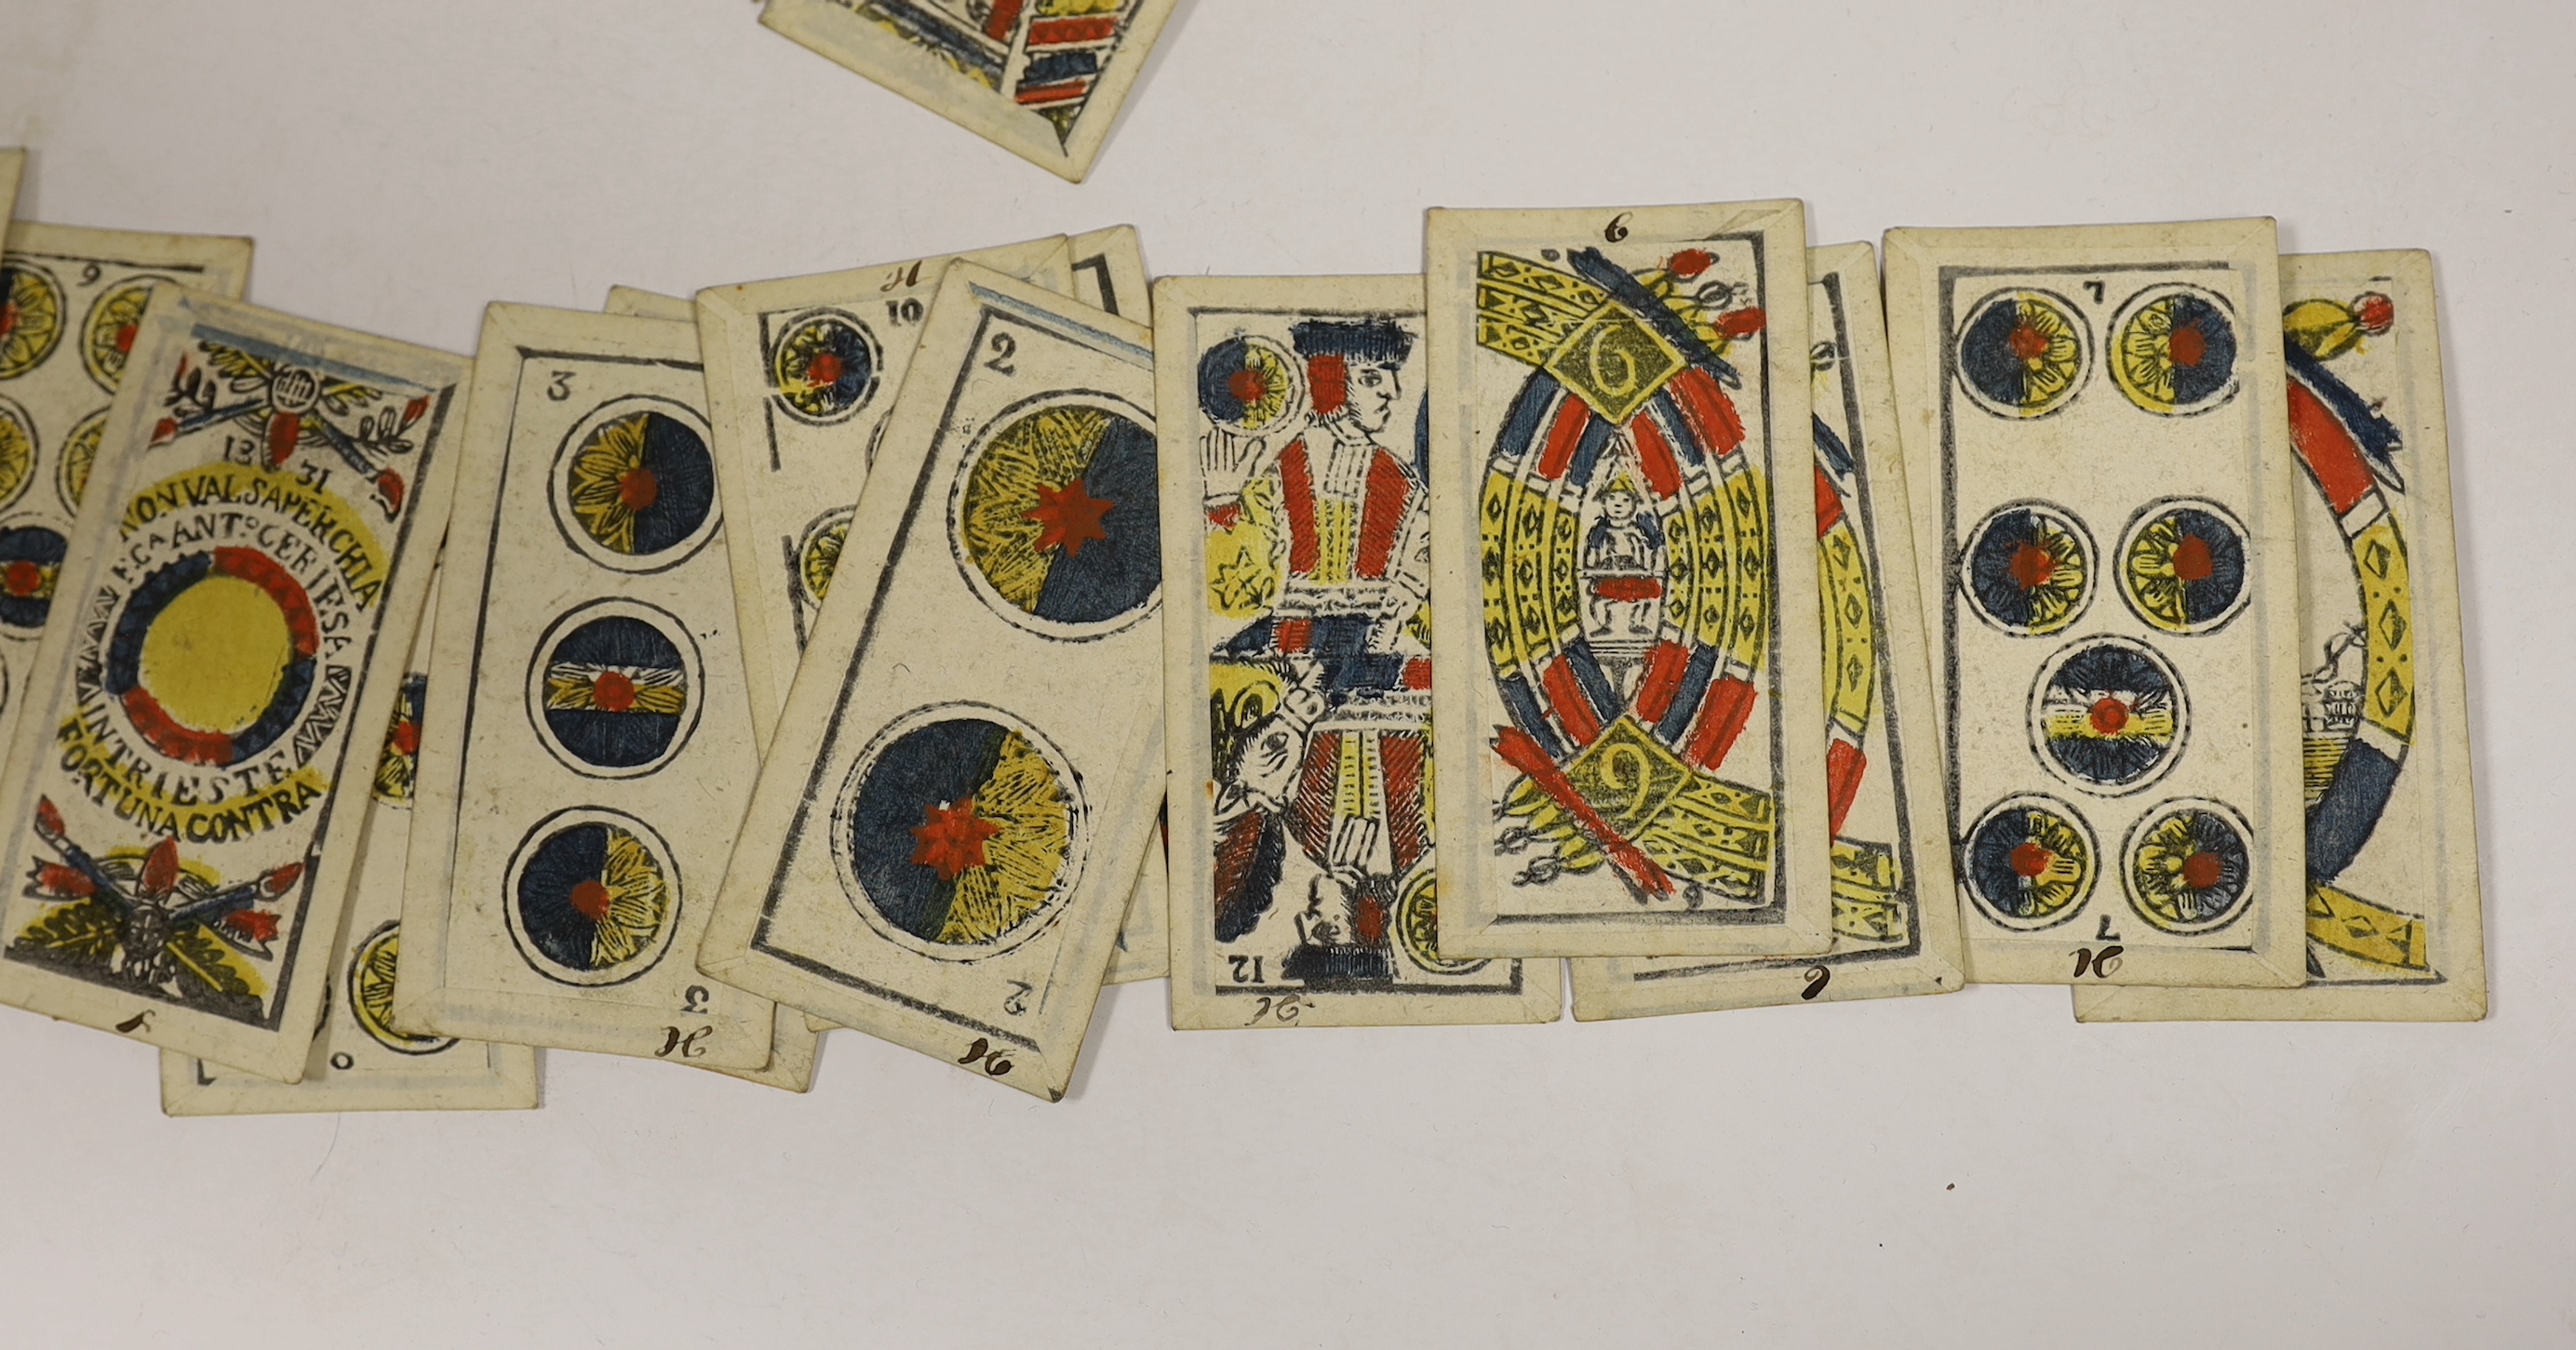 A set of 19th century hand-coloured playing cards, 52 total